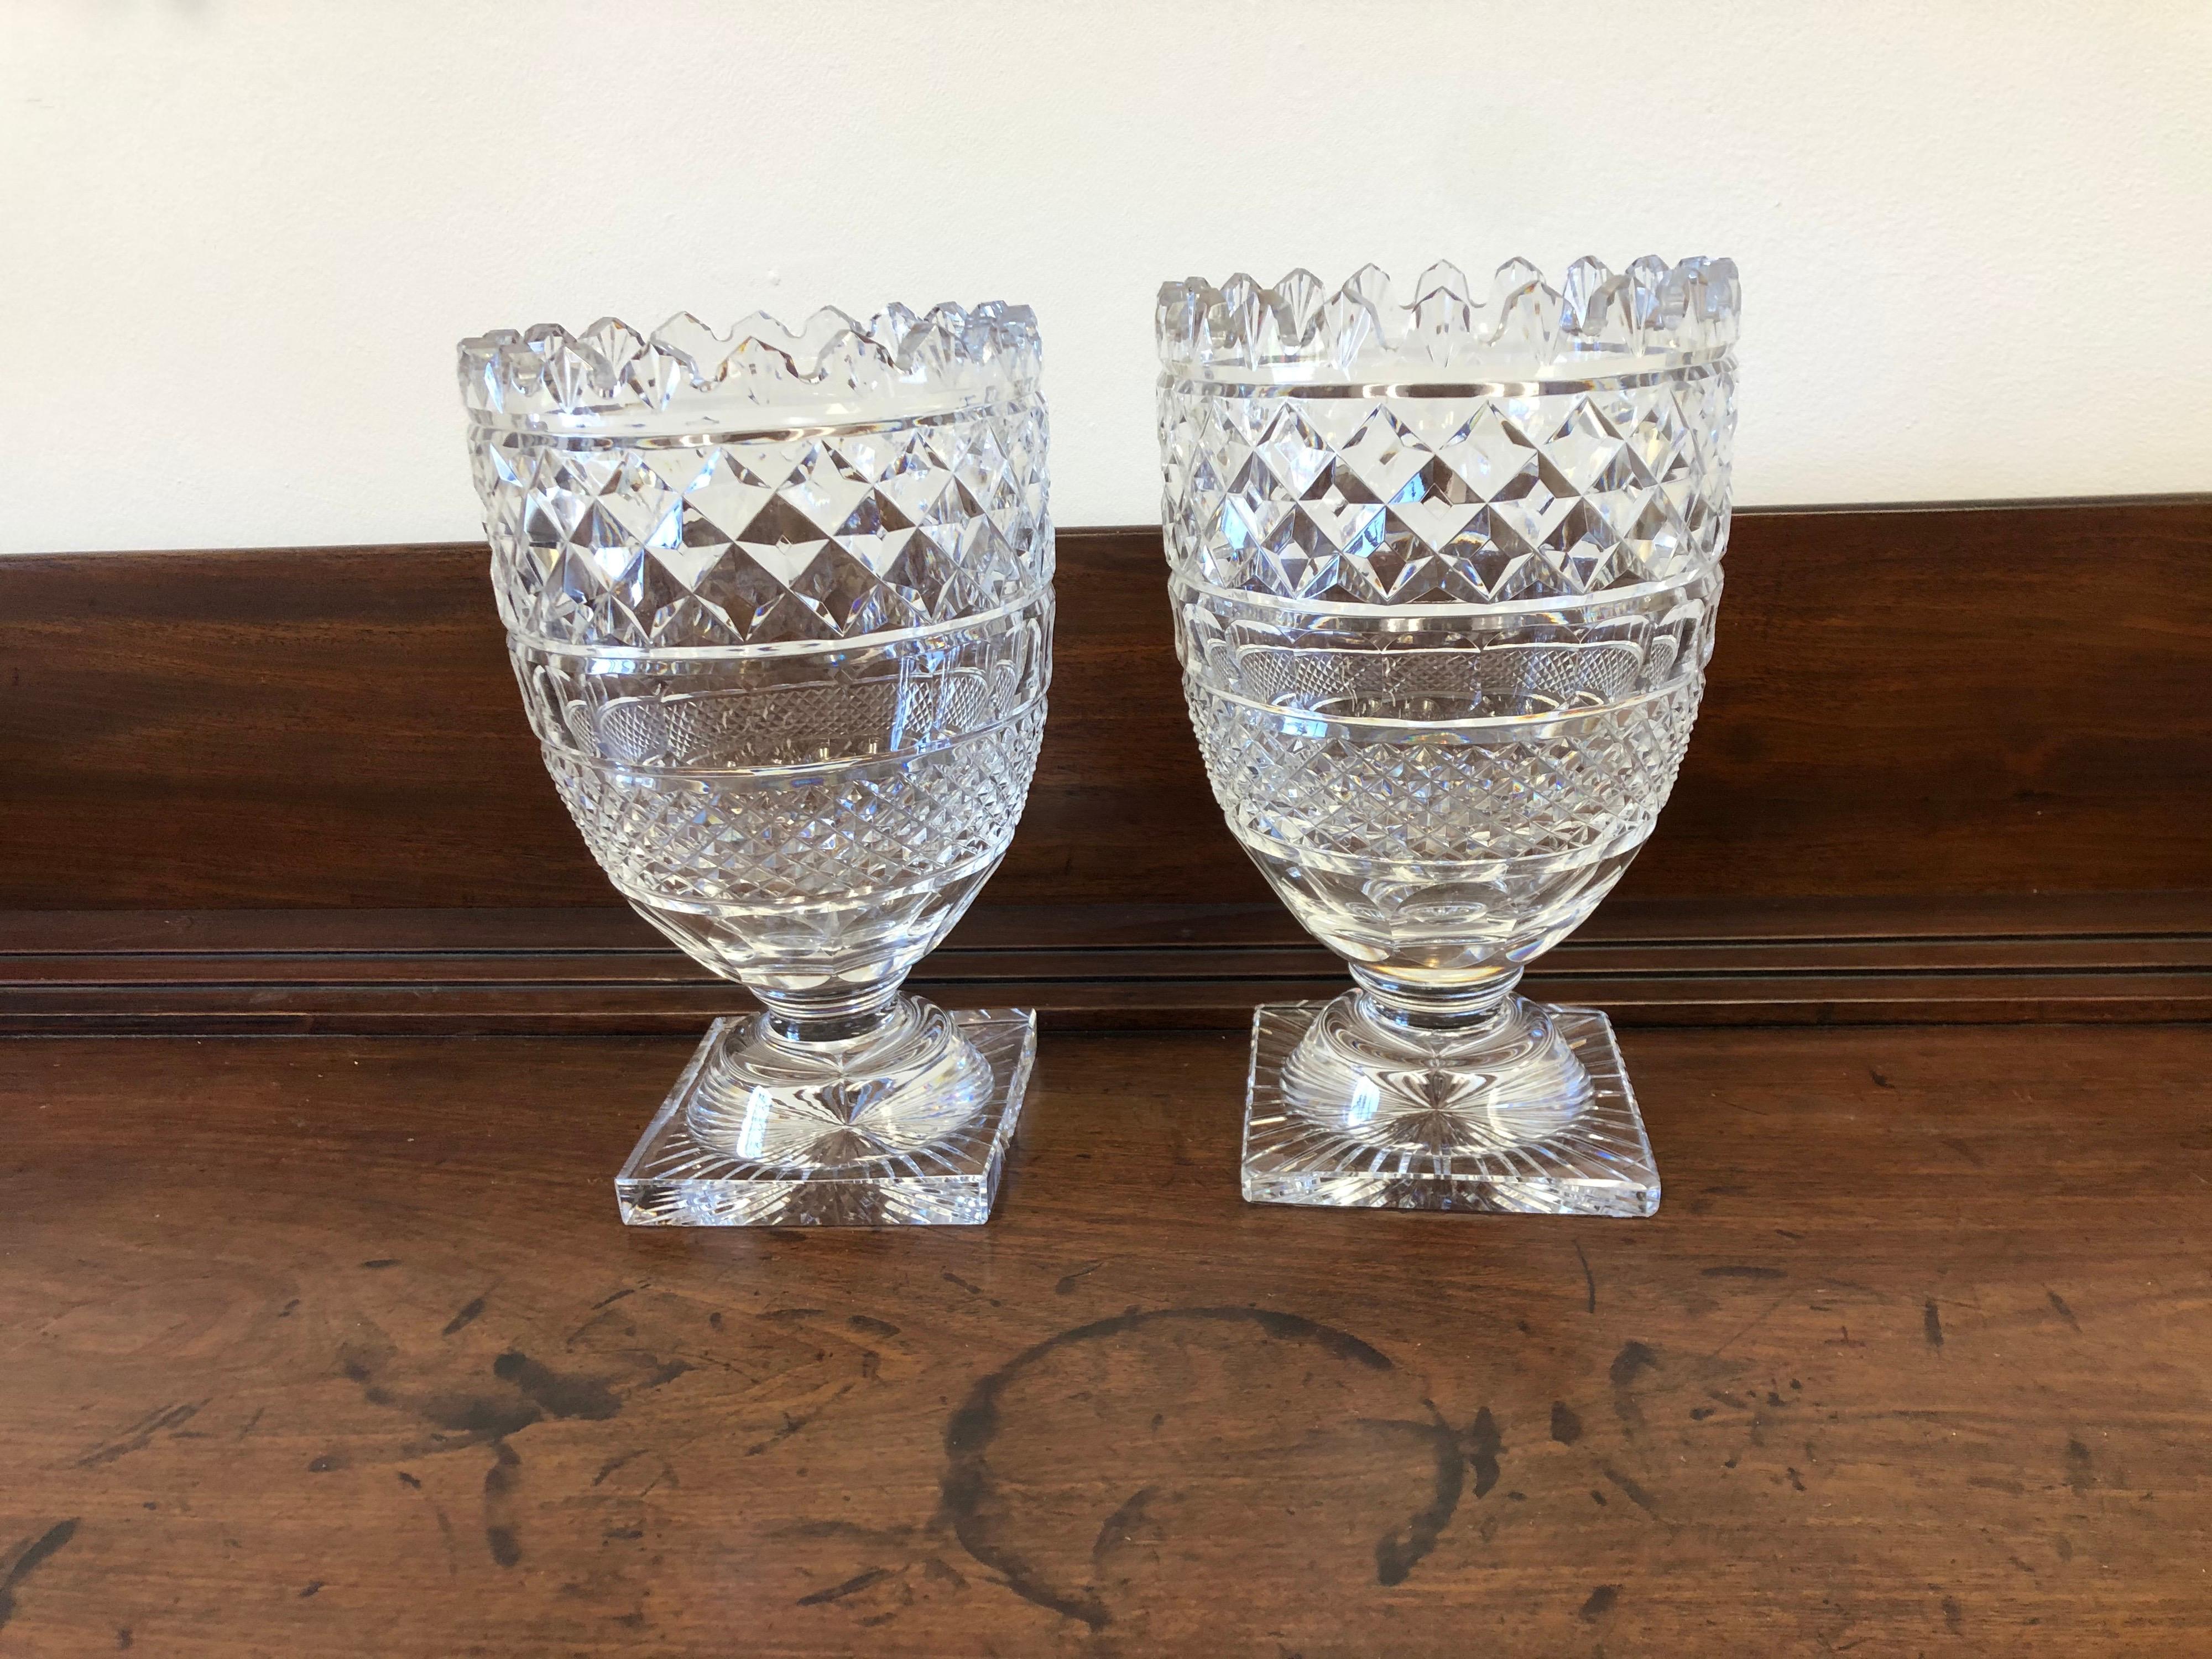 Unknown Pair of Late 19th-Early 20th Century Cut Glass Vases